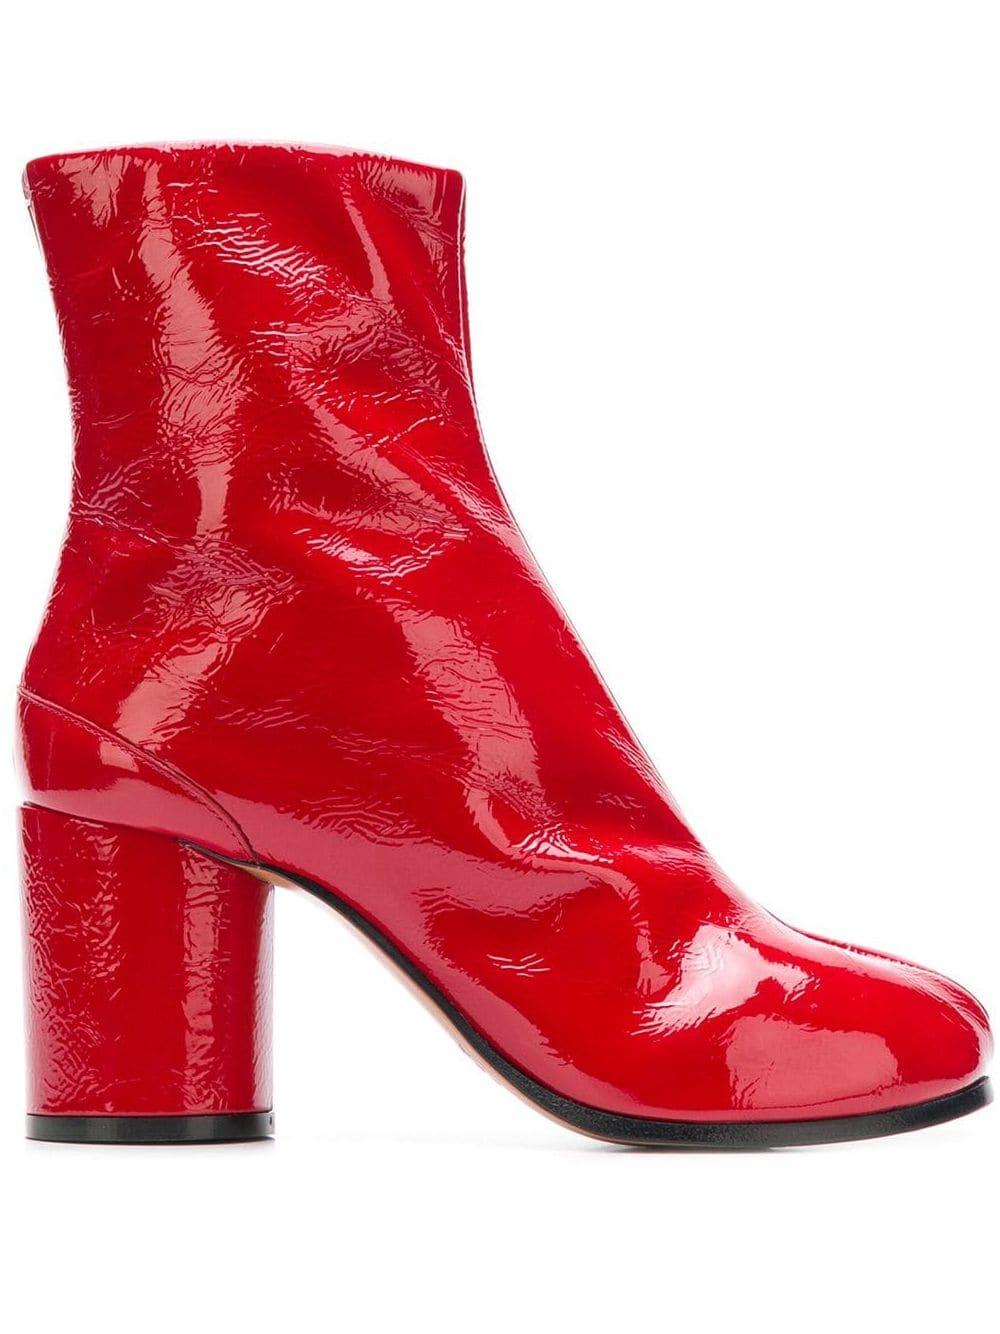 Maison Margiela Leather Tabi Boots in Red | Lyst